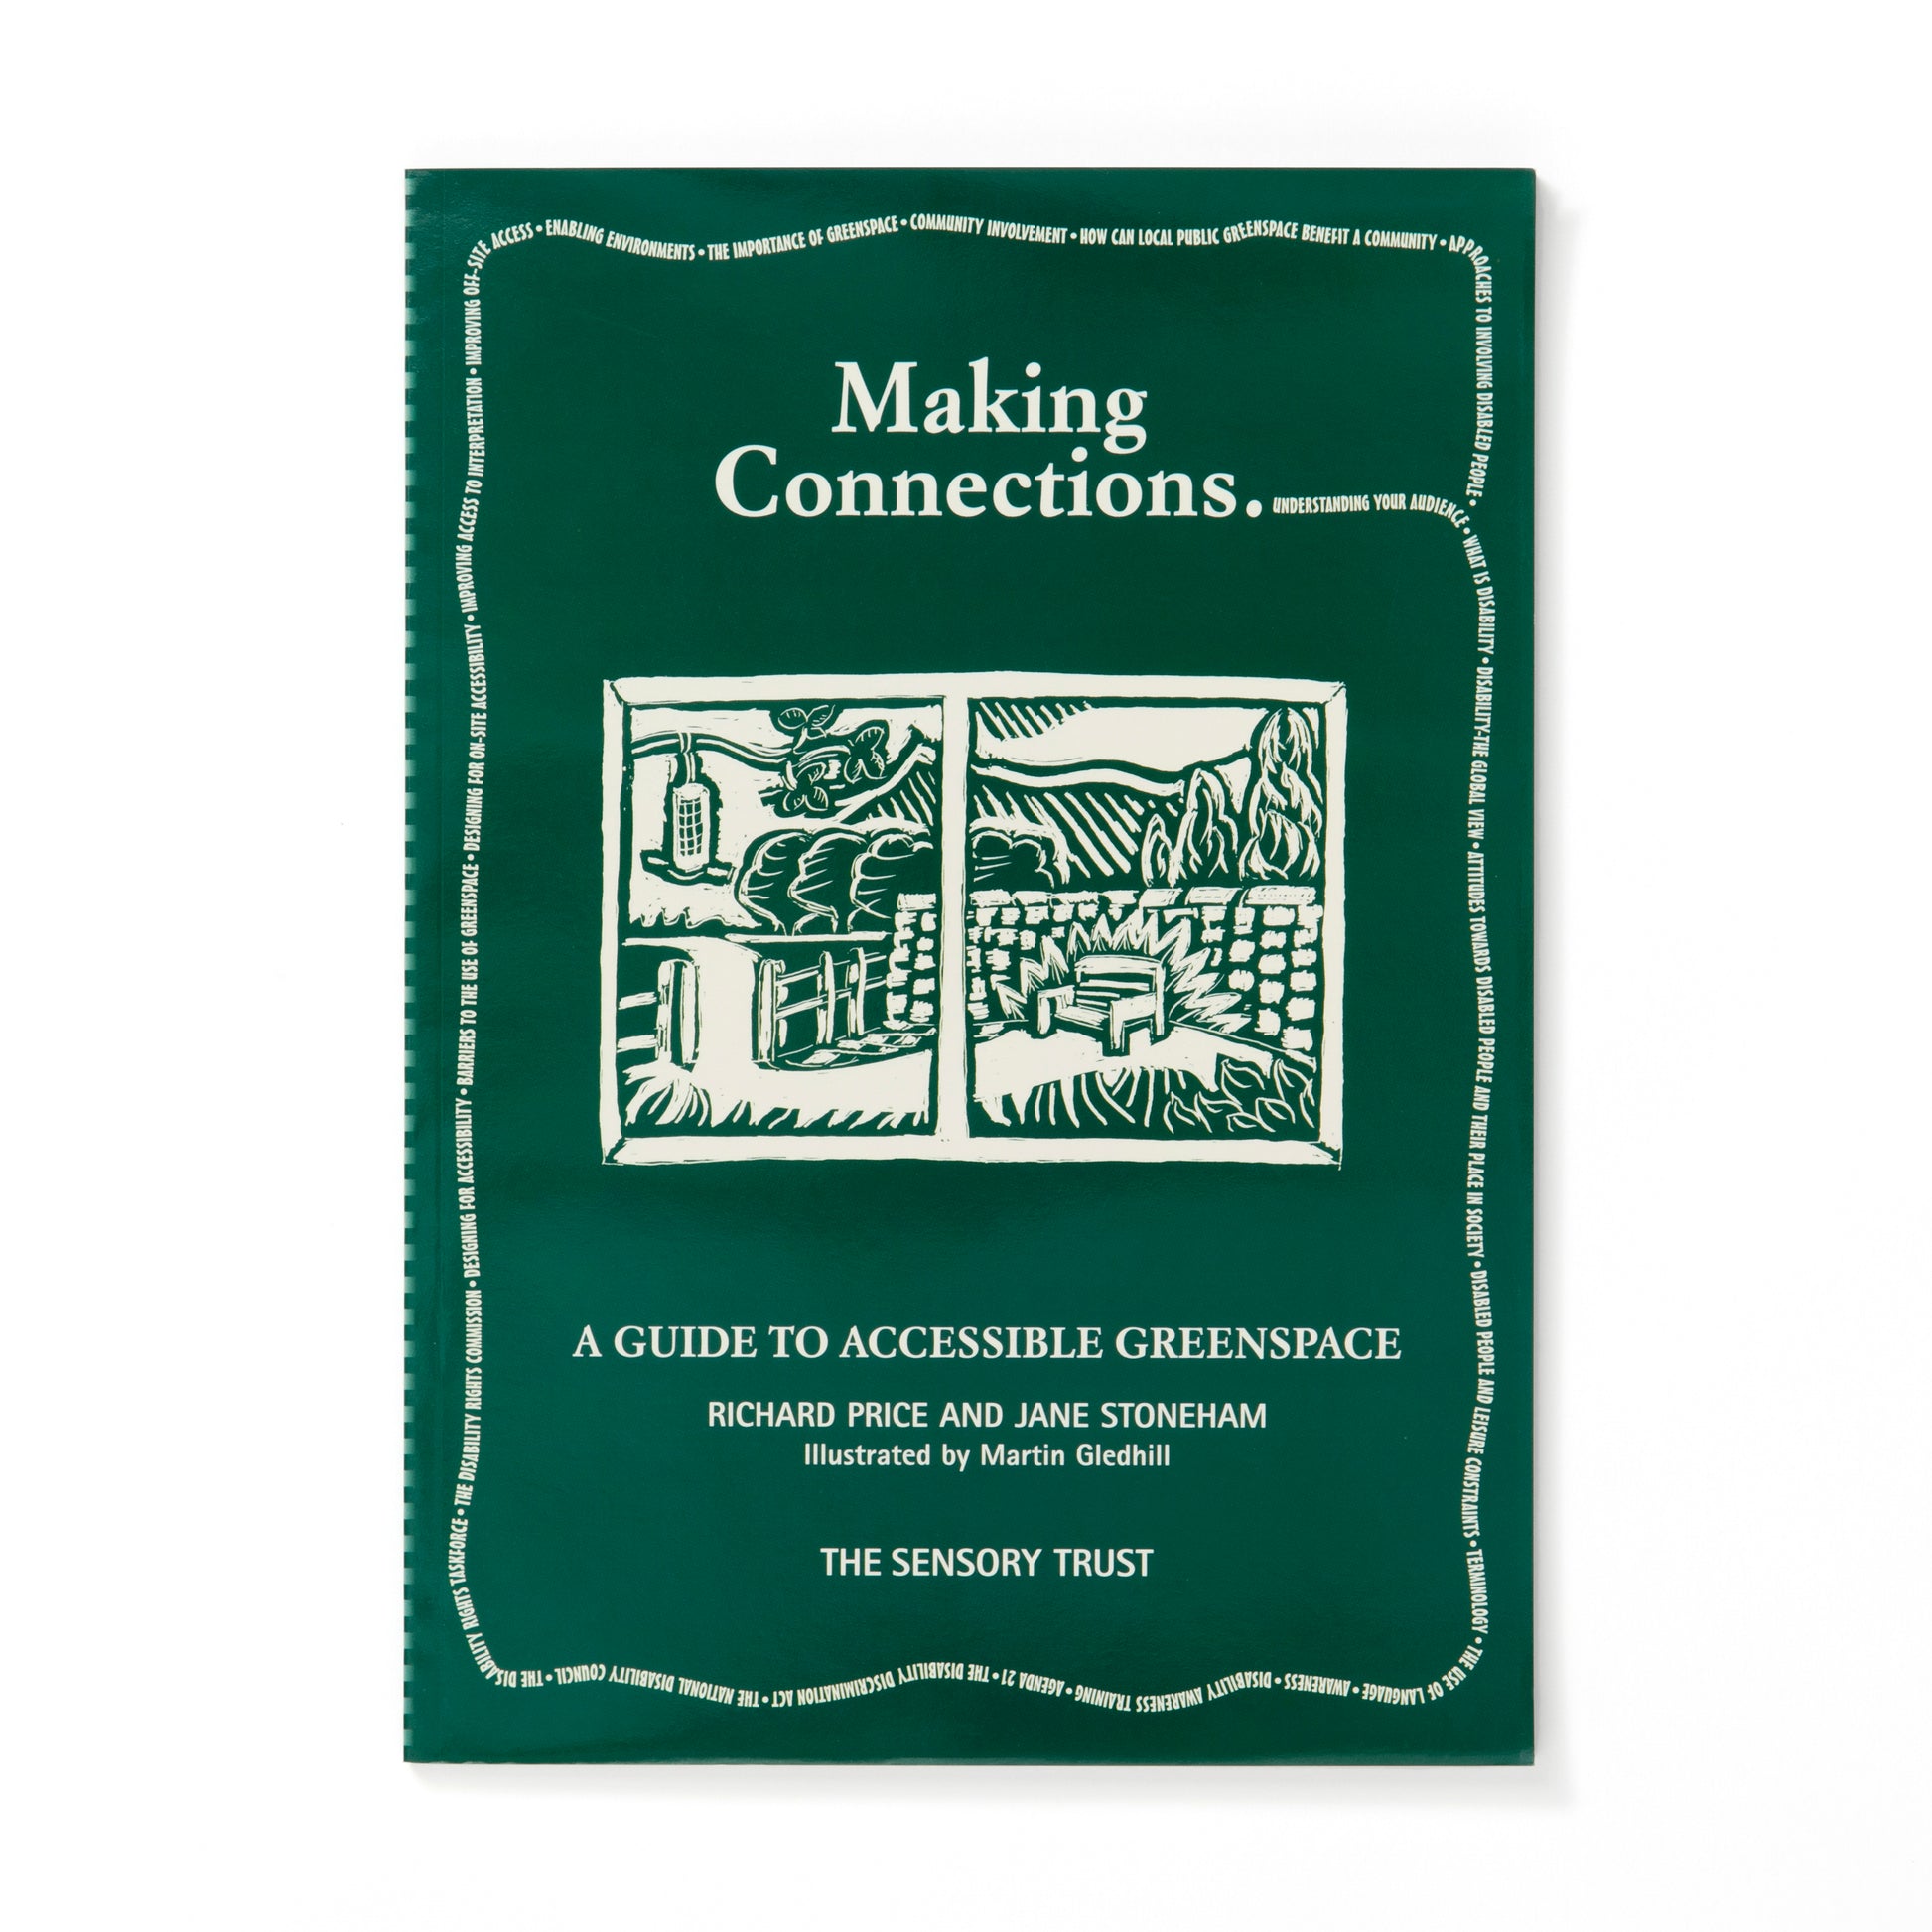 Making connections book by Sensory Trust